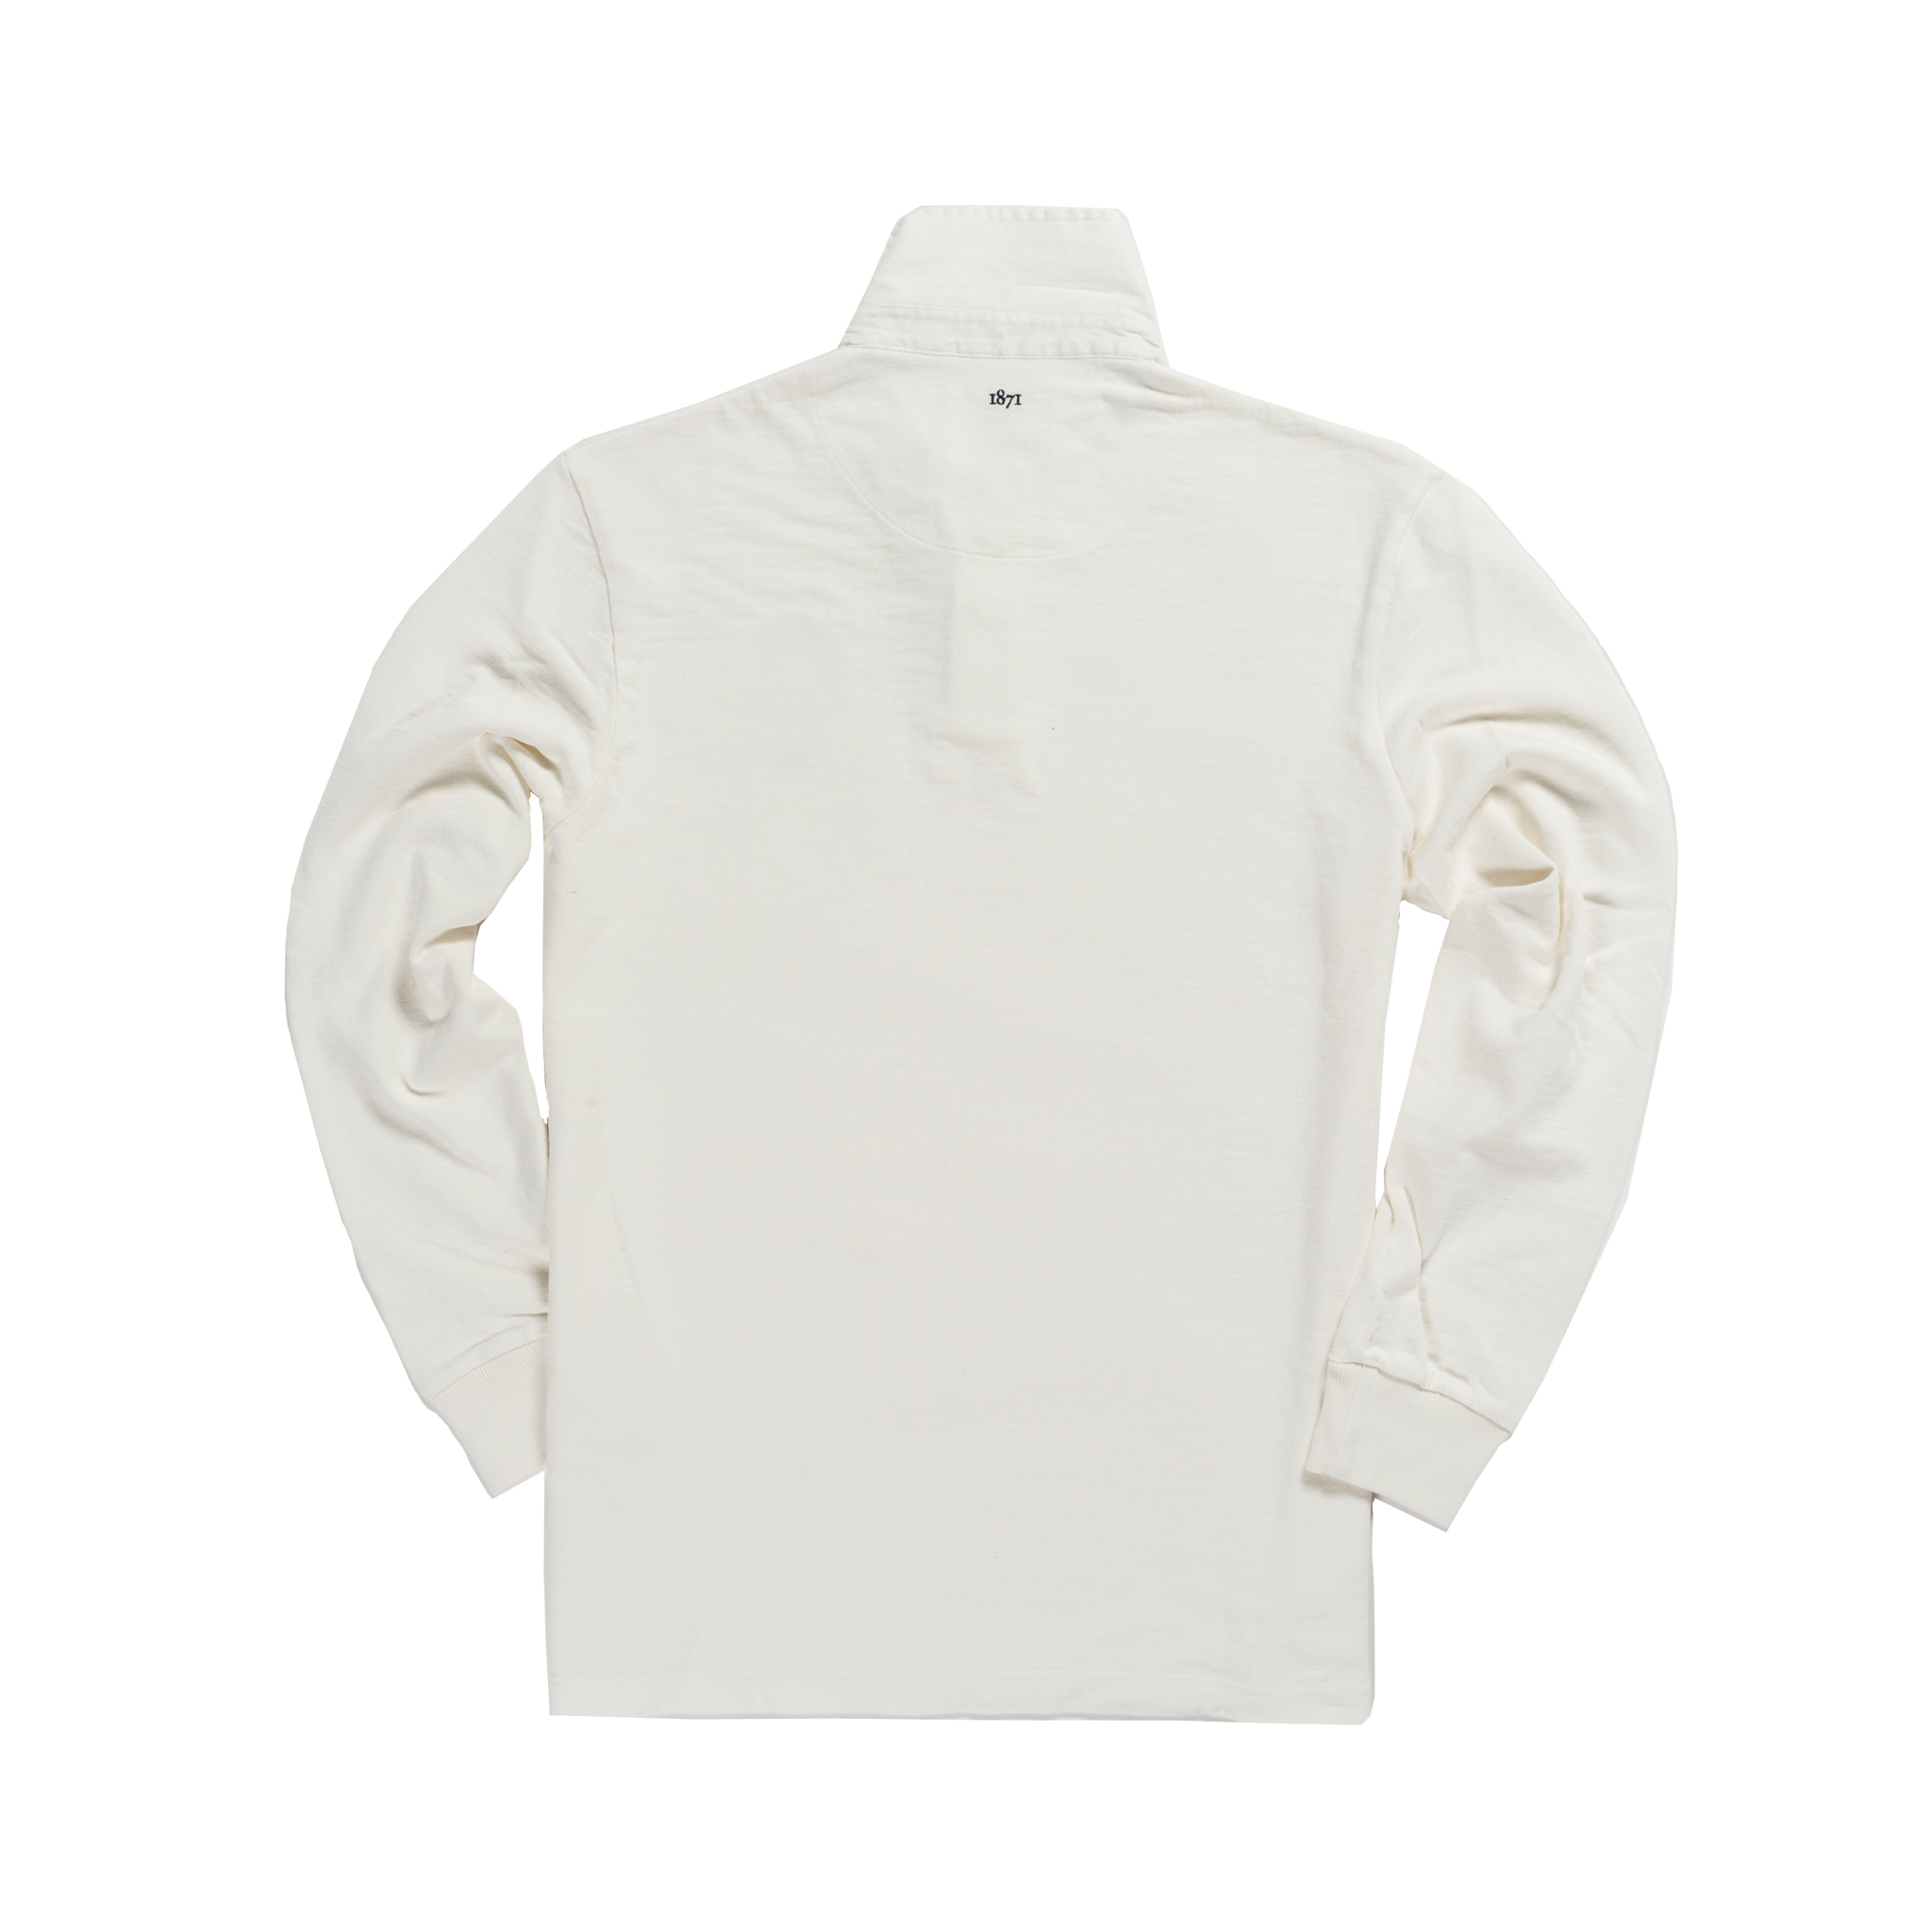 Classic White 1871 Vintage Rugby Shirt